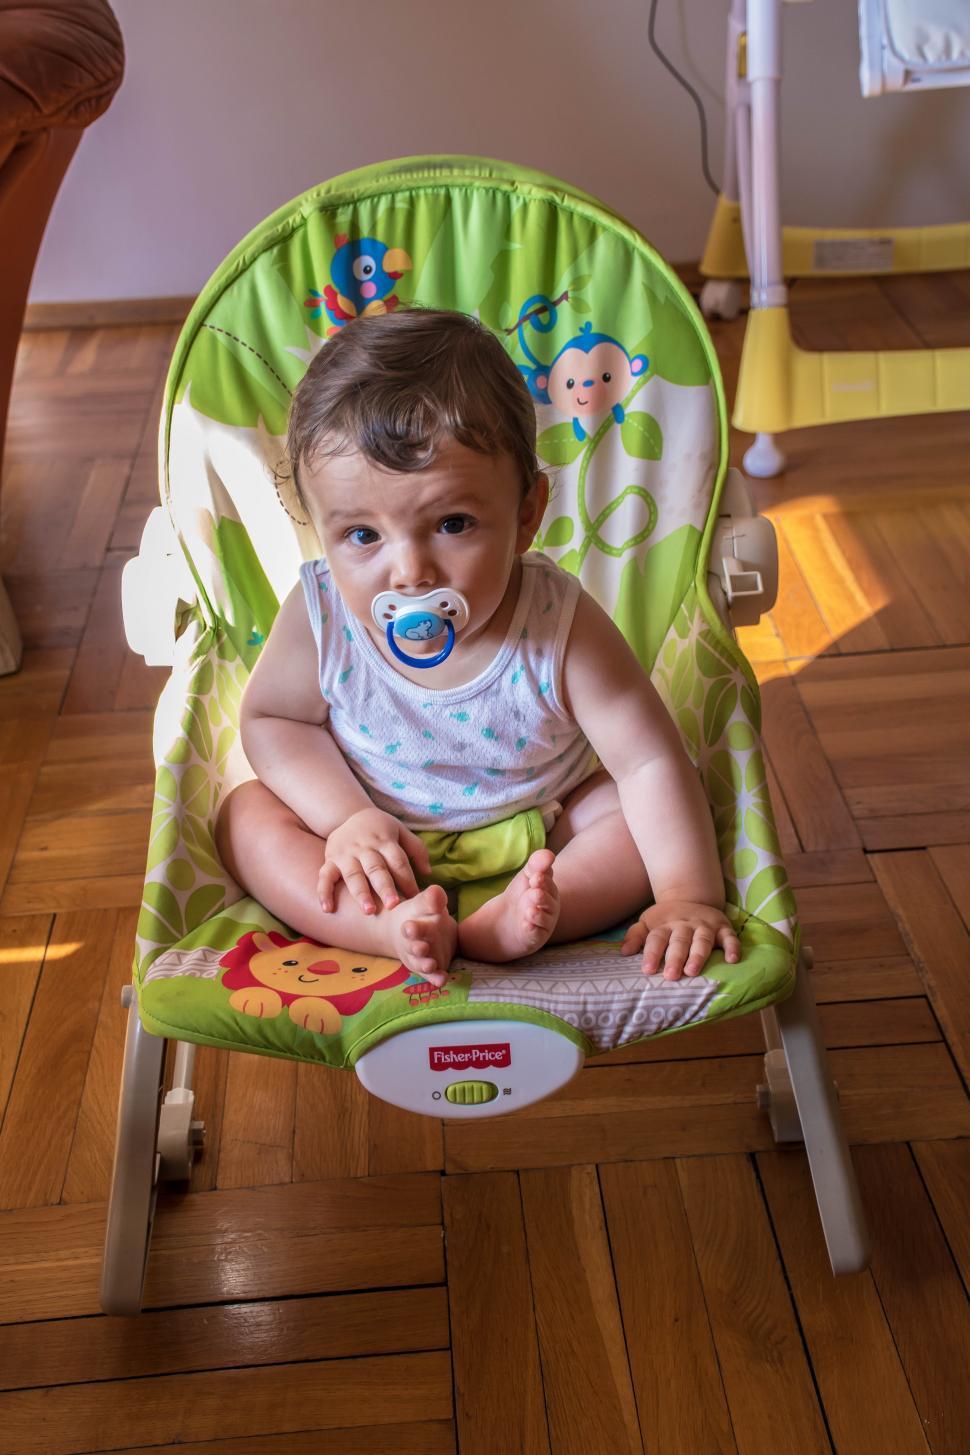 Free Image of Baby Sitting in High Chair With Pacifier 